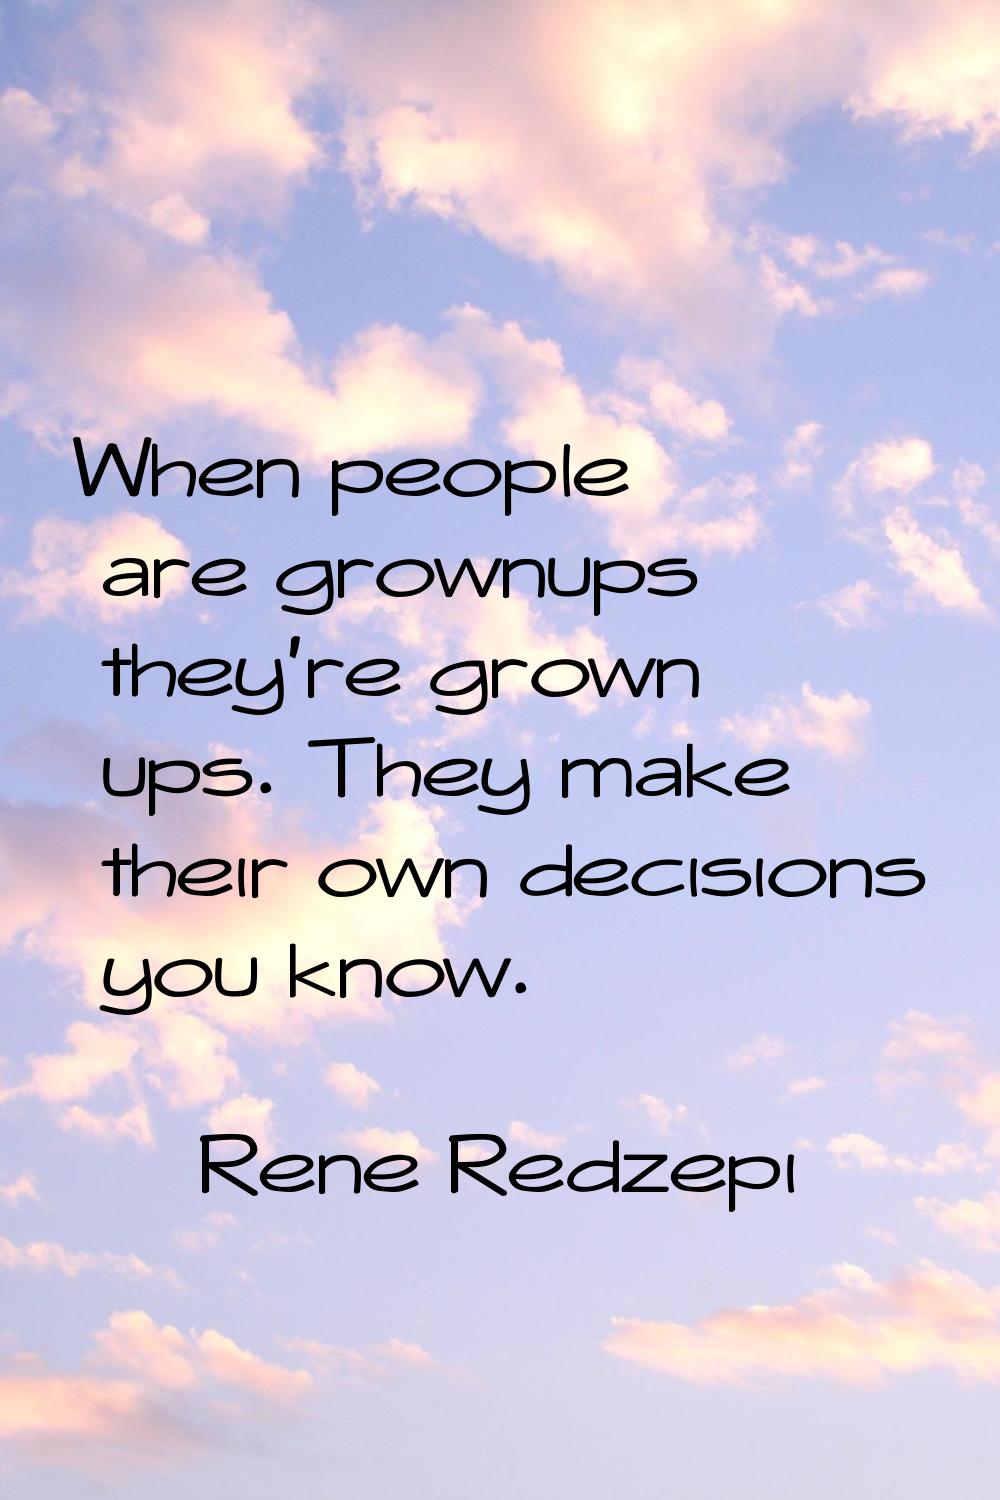 When people are grownups they're grown ups. They make their own decisions you know.